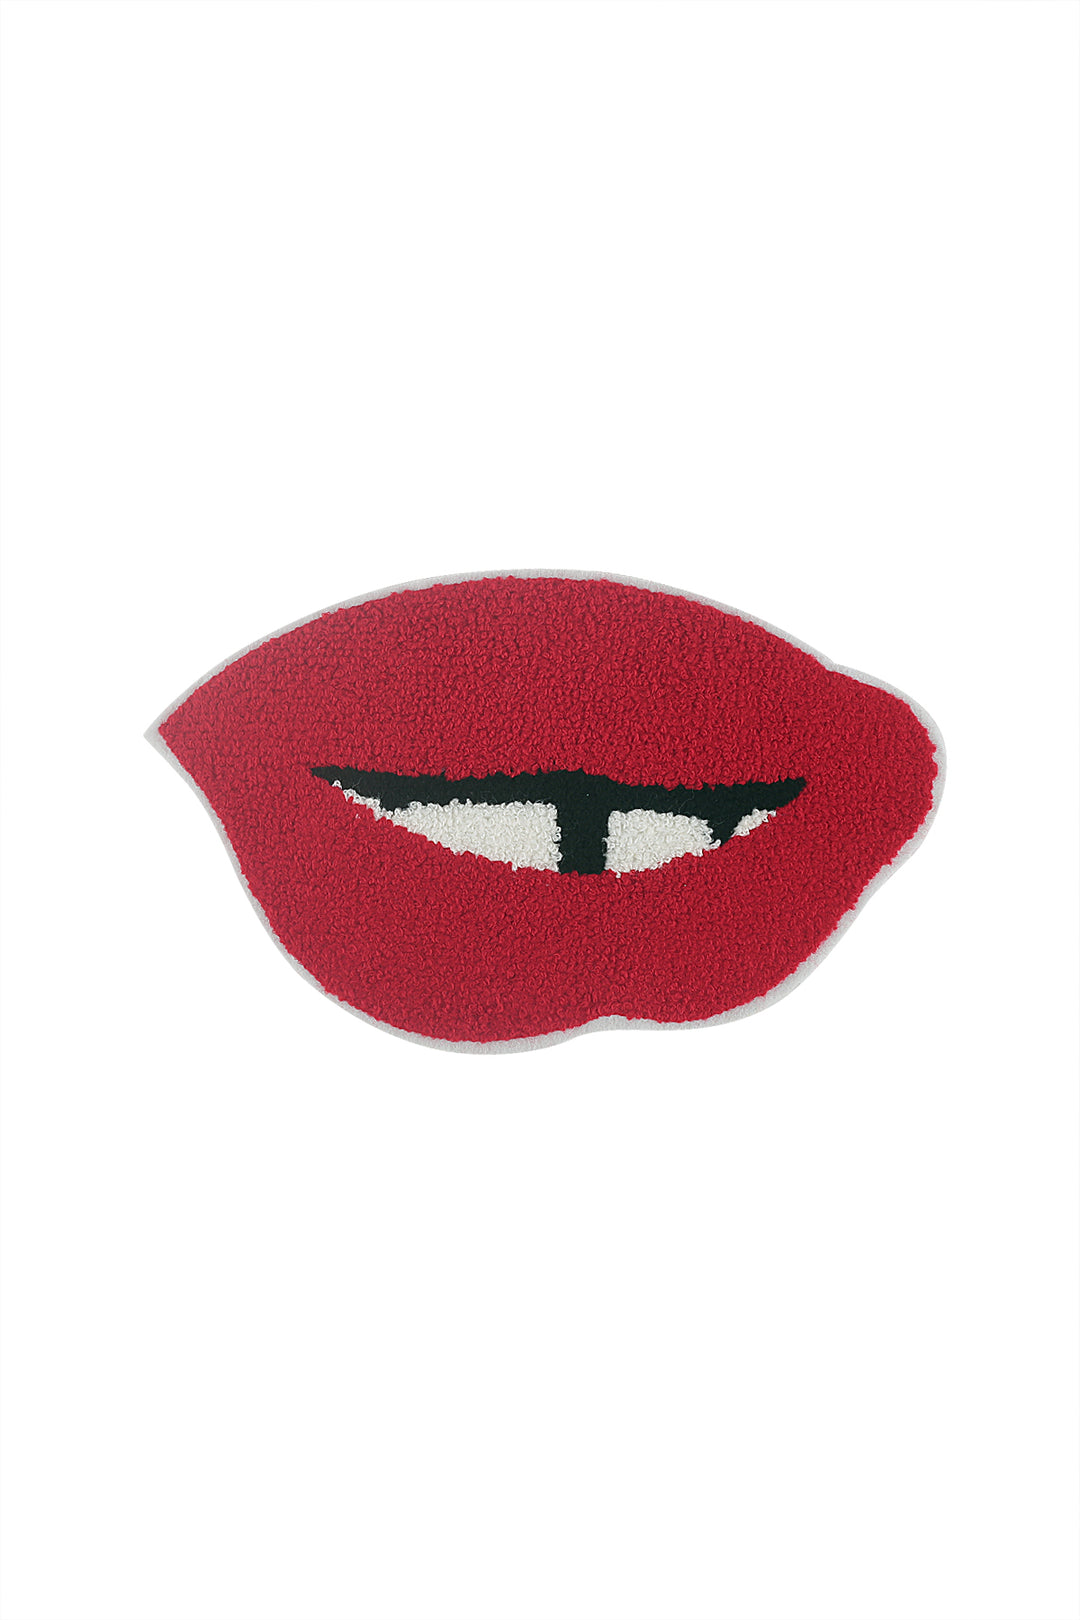 Red Colour Cool Lip Shape Sew on Chenille Embroidery Patch